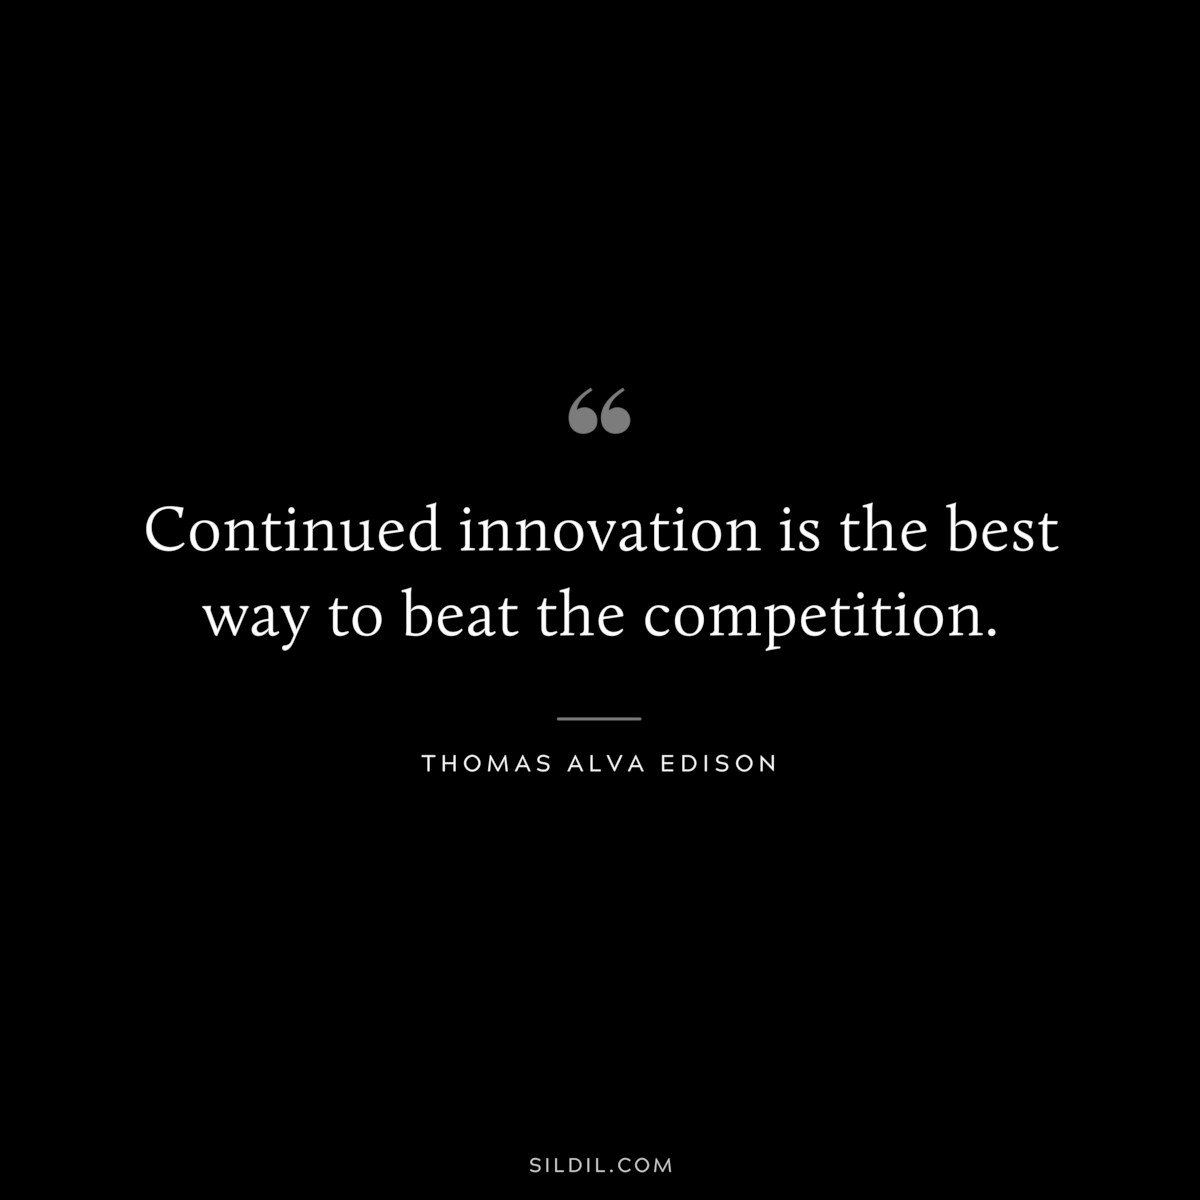 Continued innovation is the best way to beat the competition. ― Thomas Alva Edison